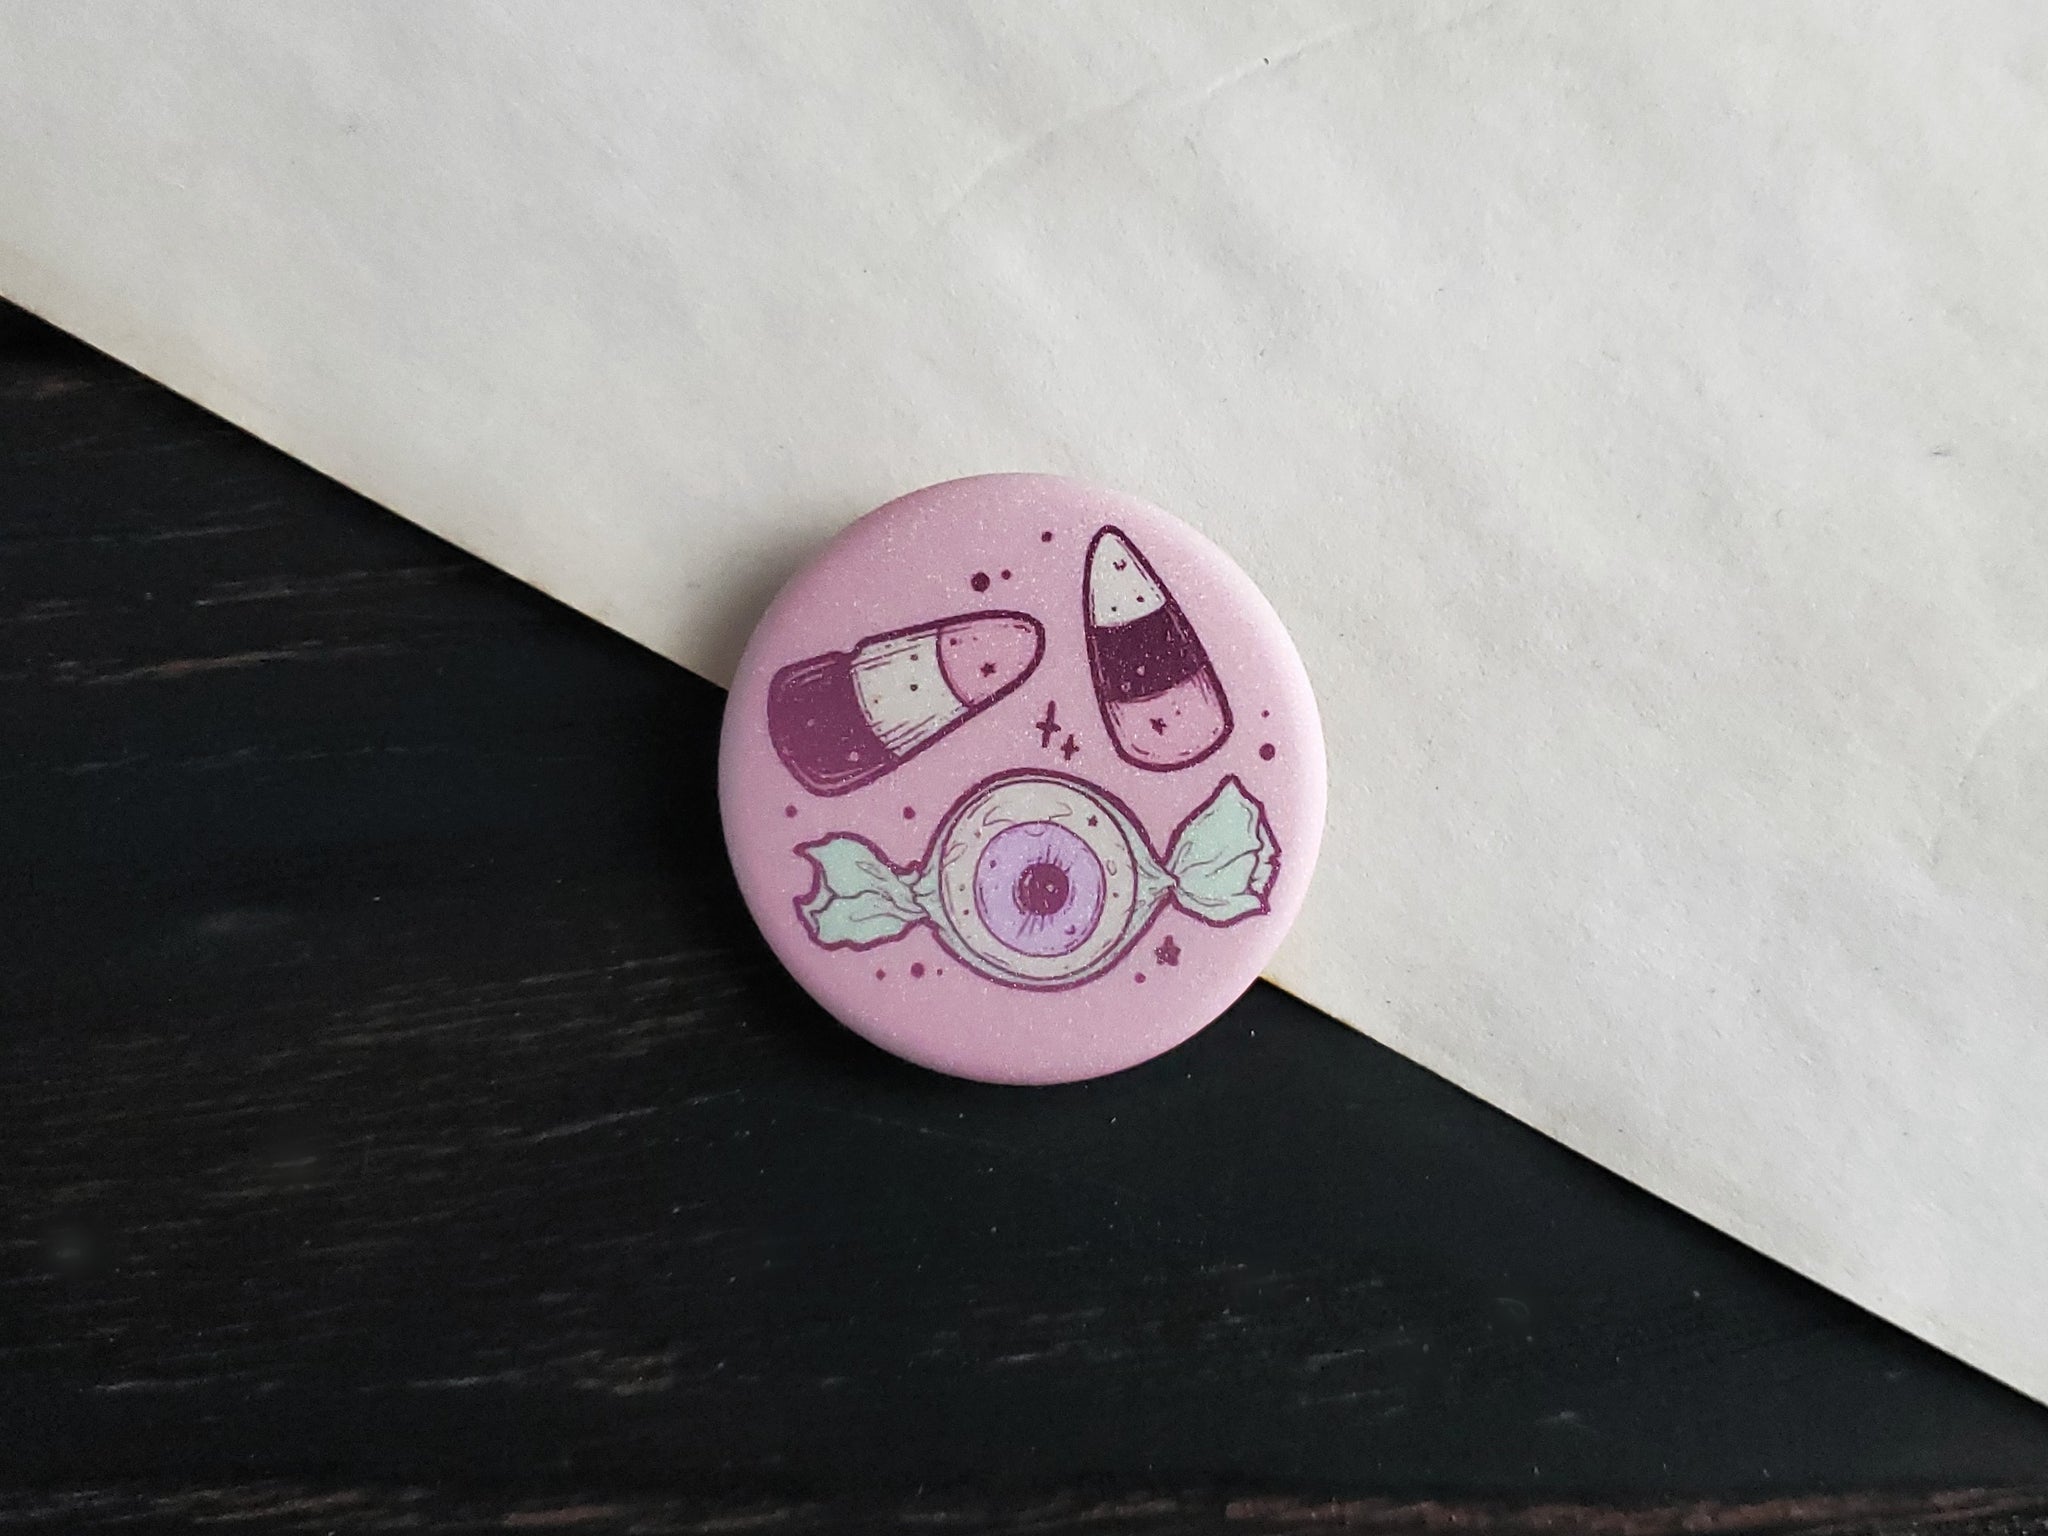 Pink and Green Halloween Candy pin badge